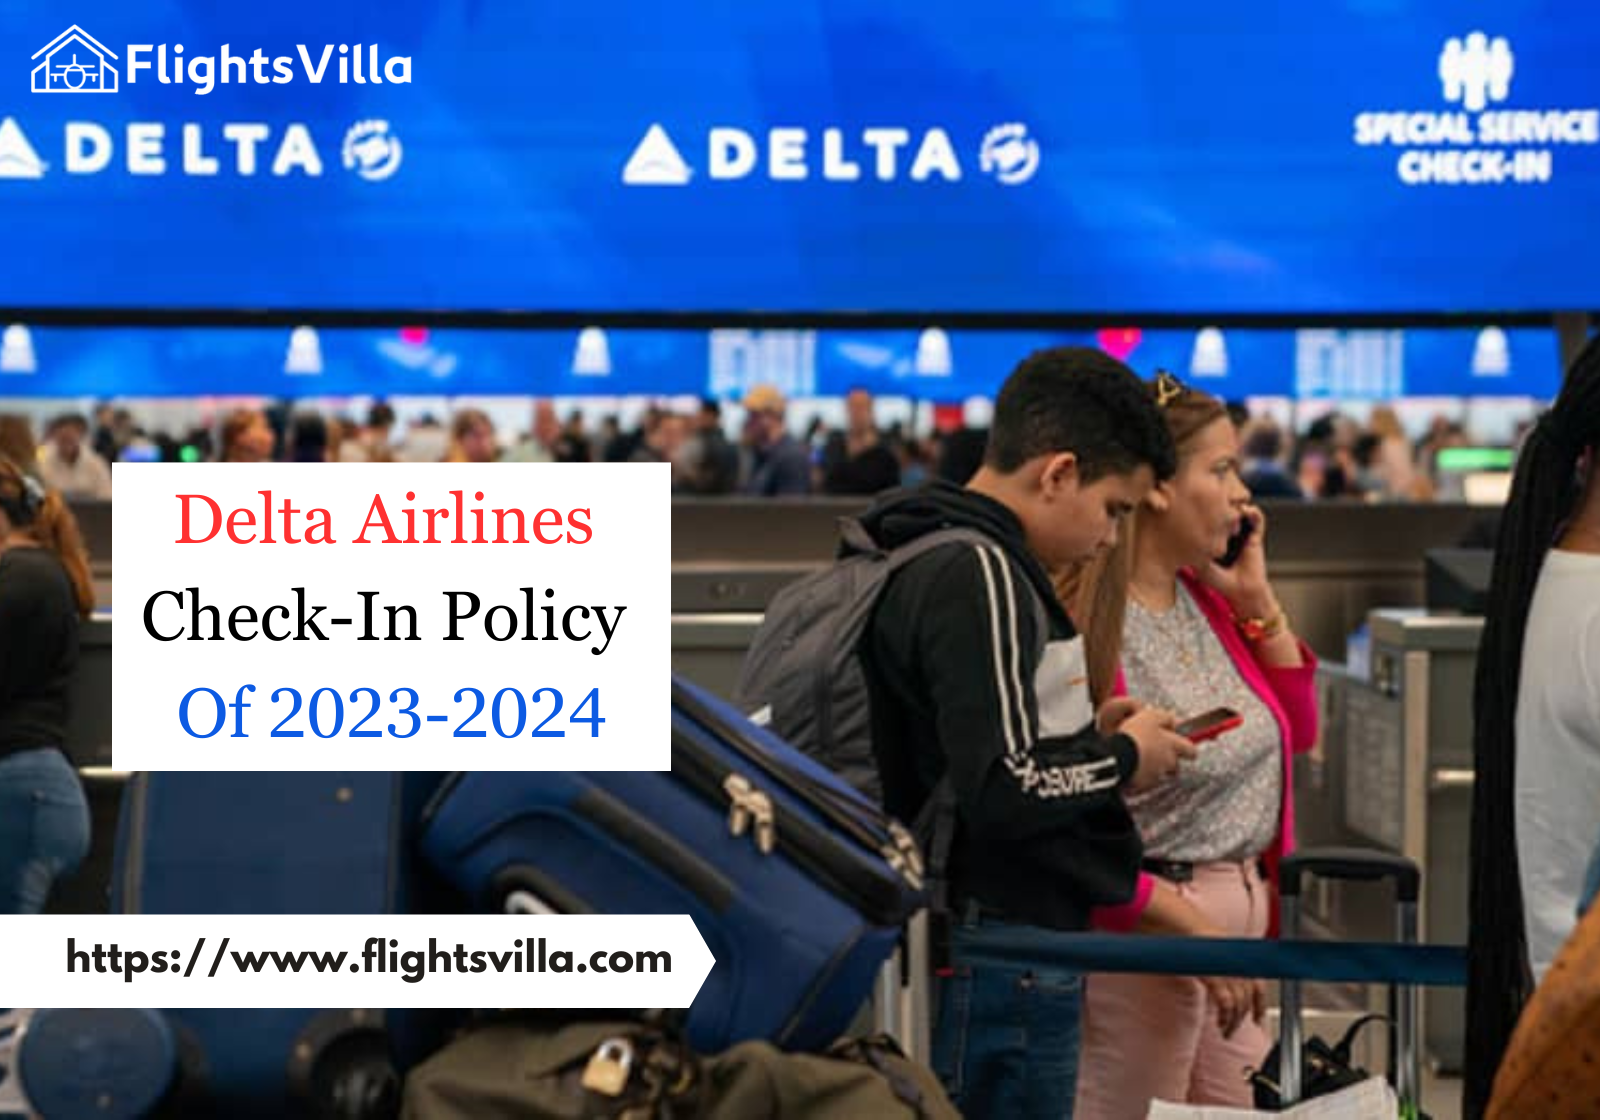 Delta Airlines Flight Check-In Policy of 2023-2024